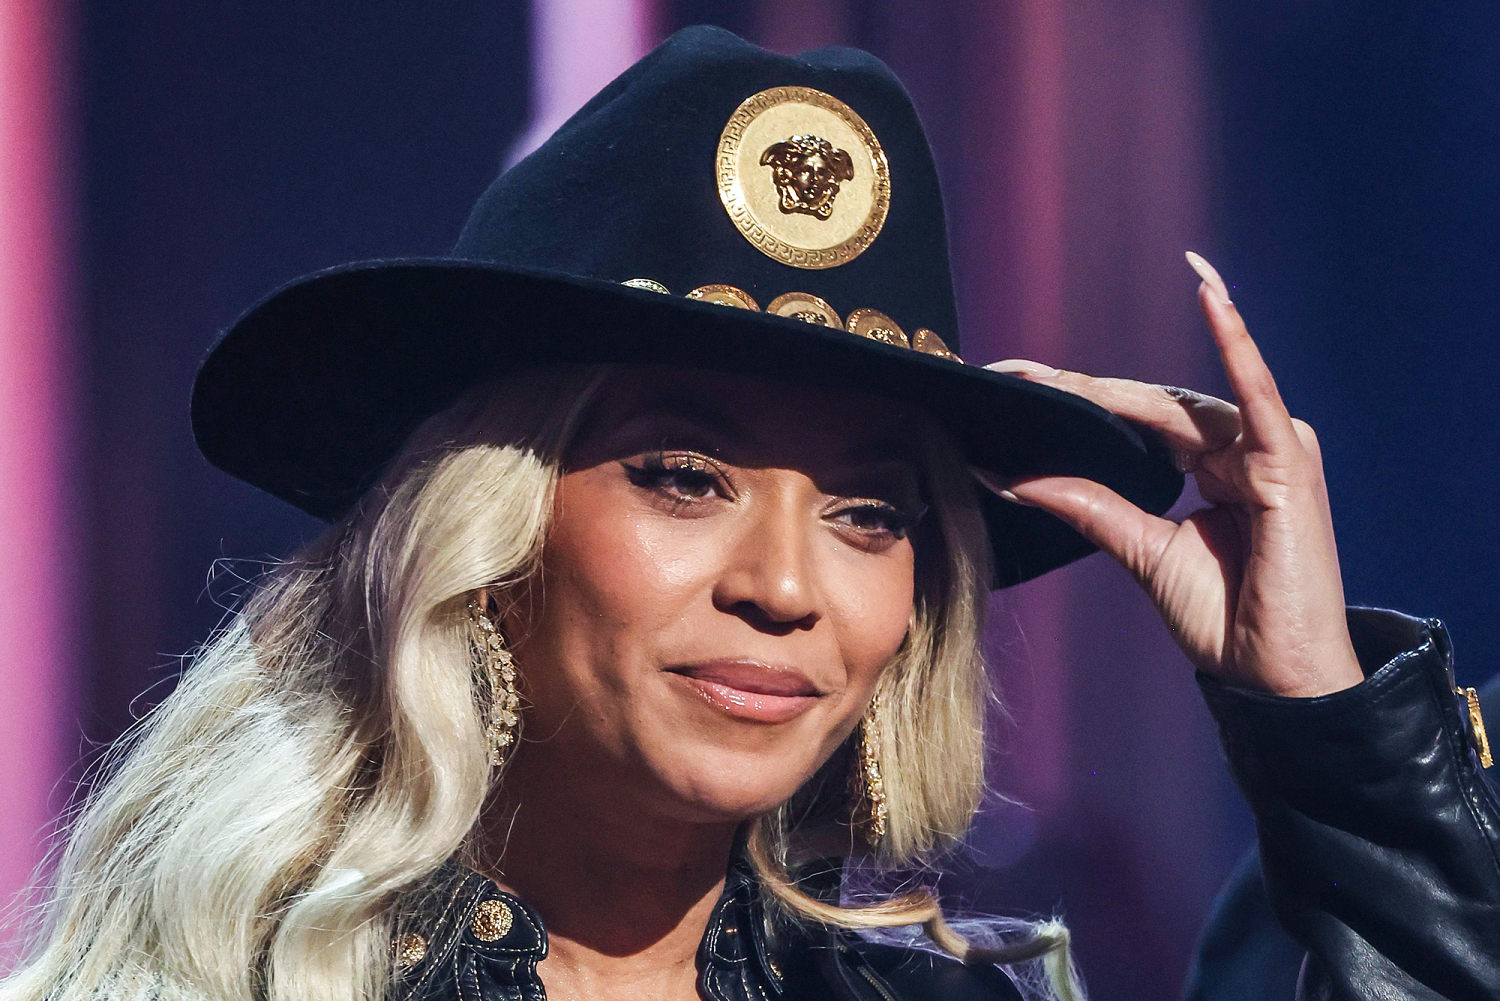 Western boot sales jumped after Beyoncé dropped 'Cowboy Carter'